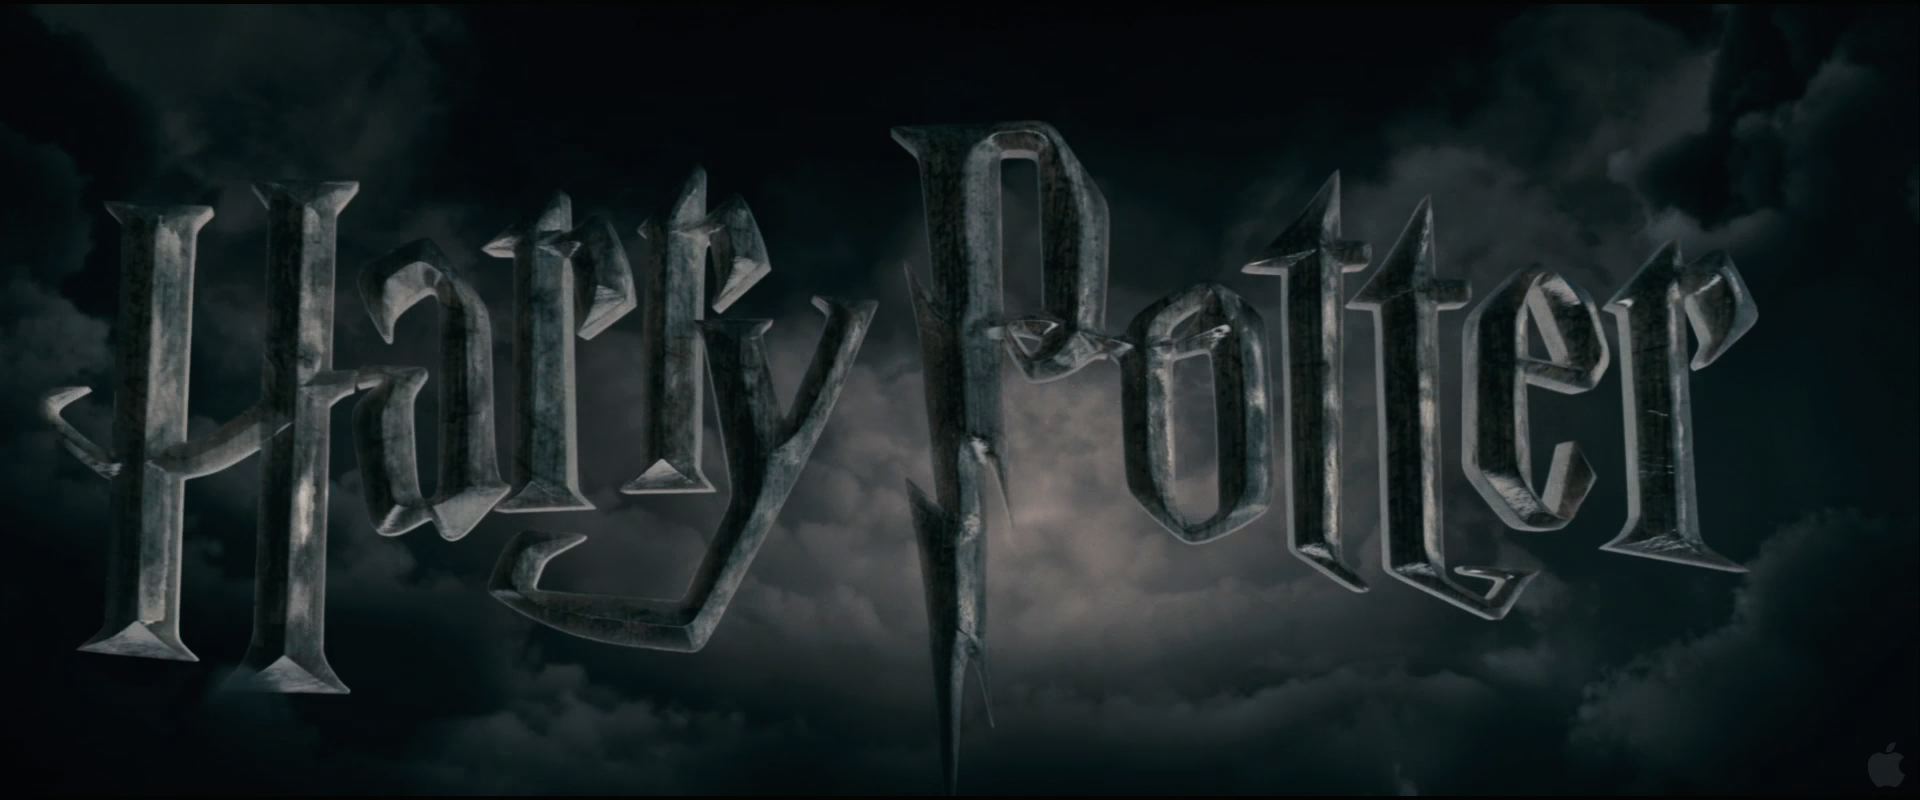 Harry Potter Movie Logo wallpaper   Click picture for high resolution